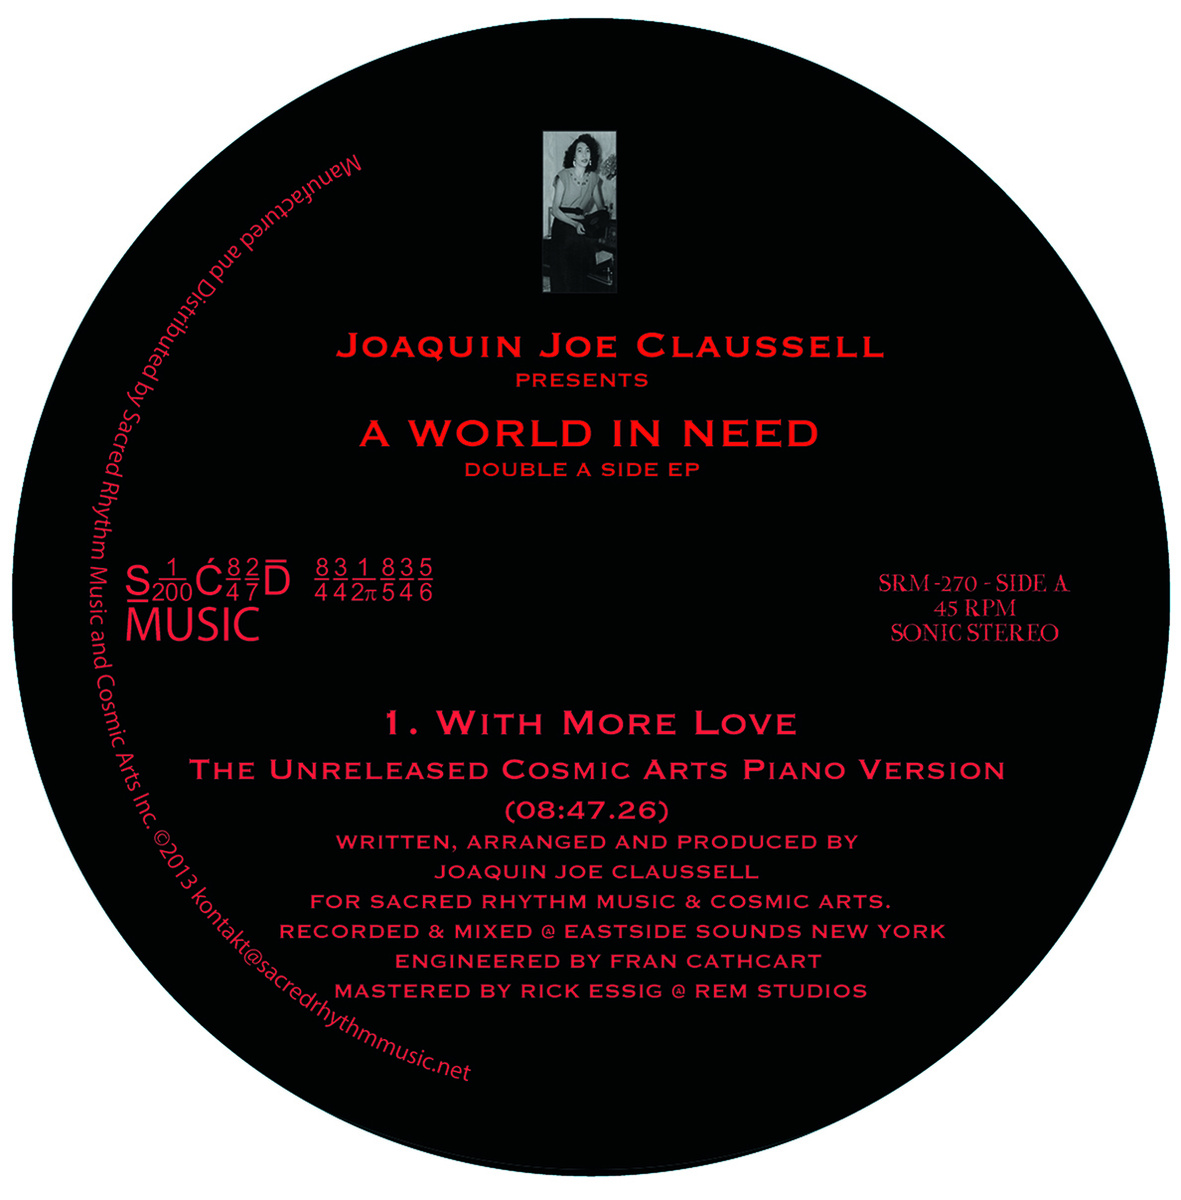 00-Joaquin Joe Claussell-A World In Need - Double A Side EP-2015-